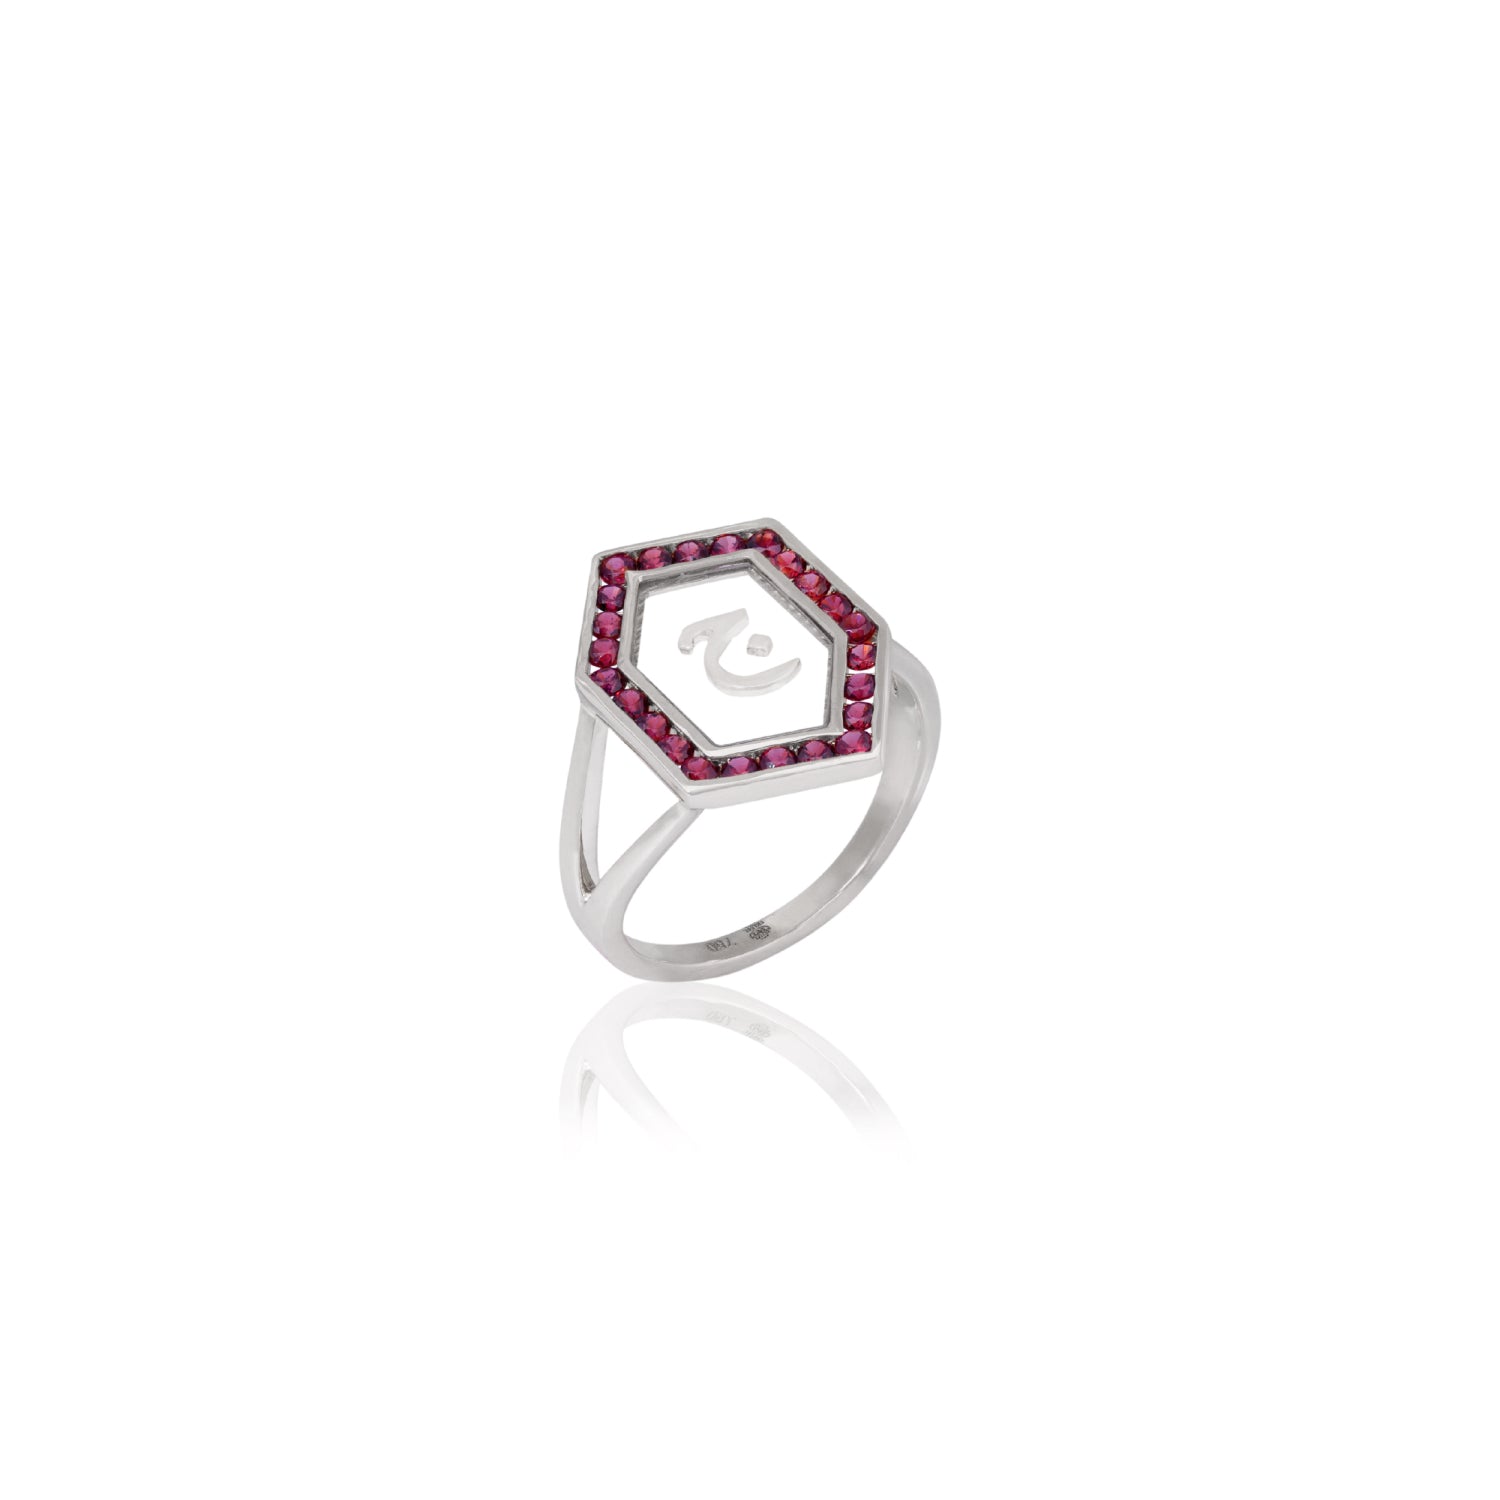 Qamoos 1.0 Letter ج Ruby Ring in White Gold